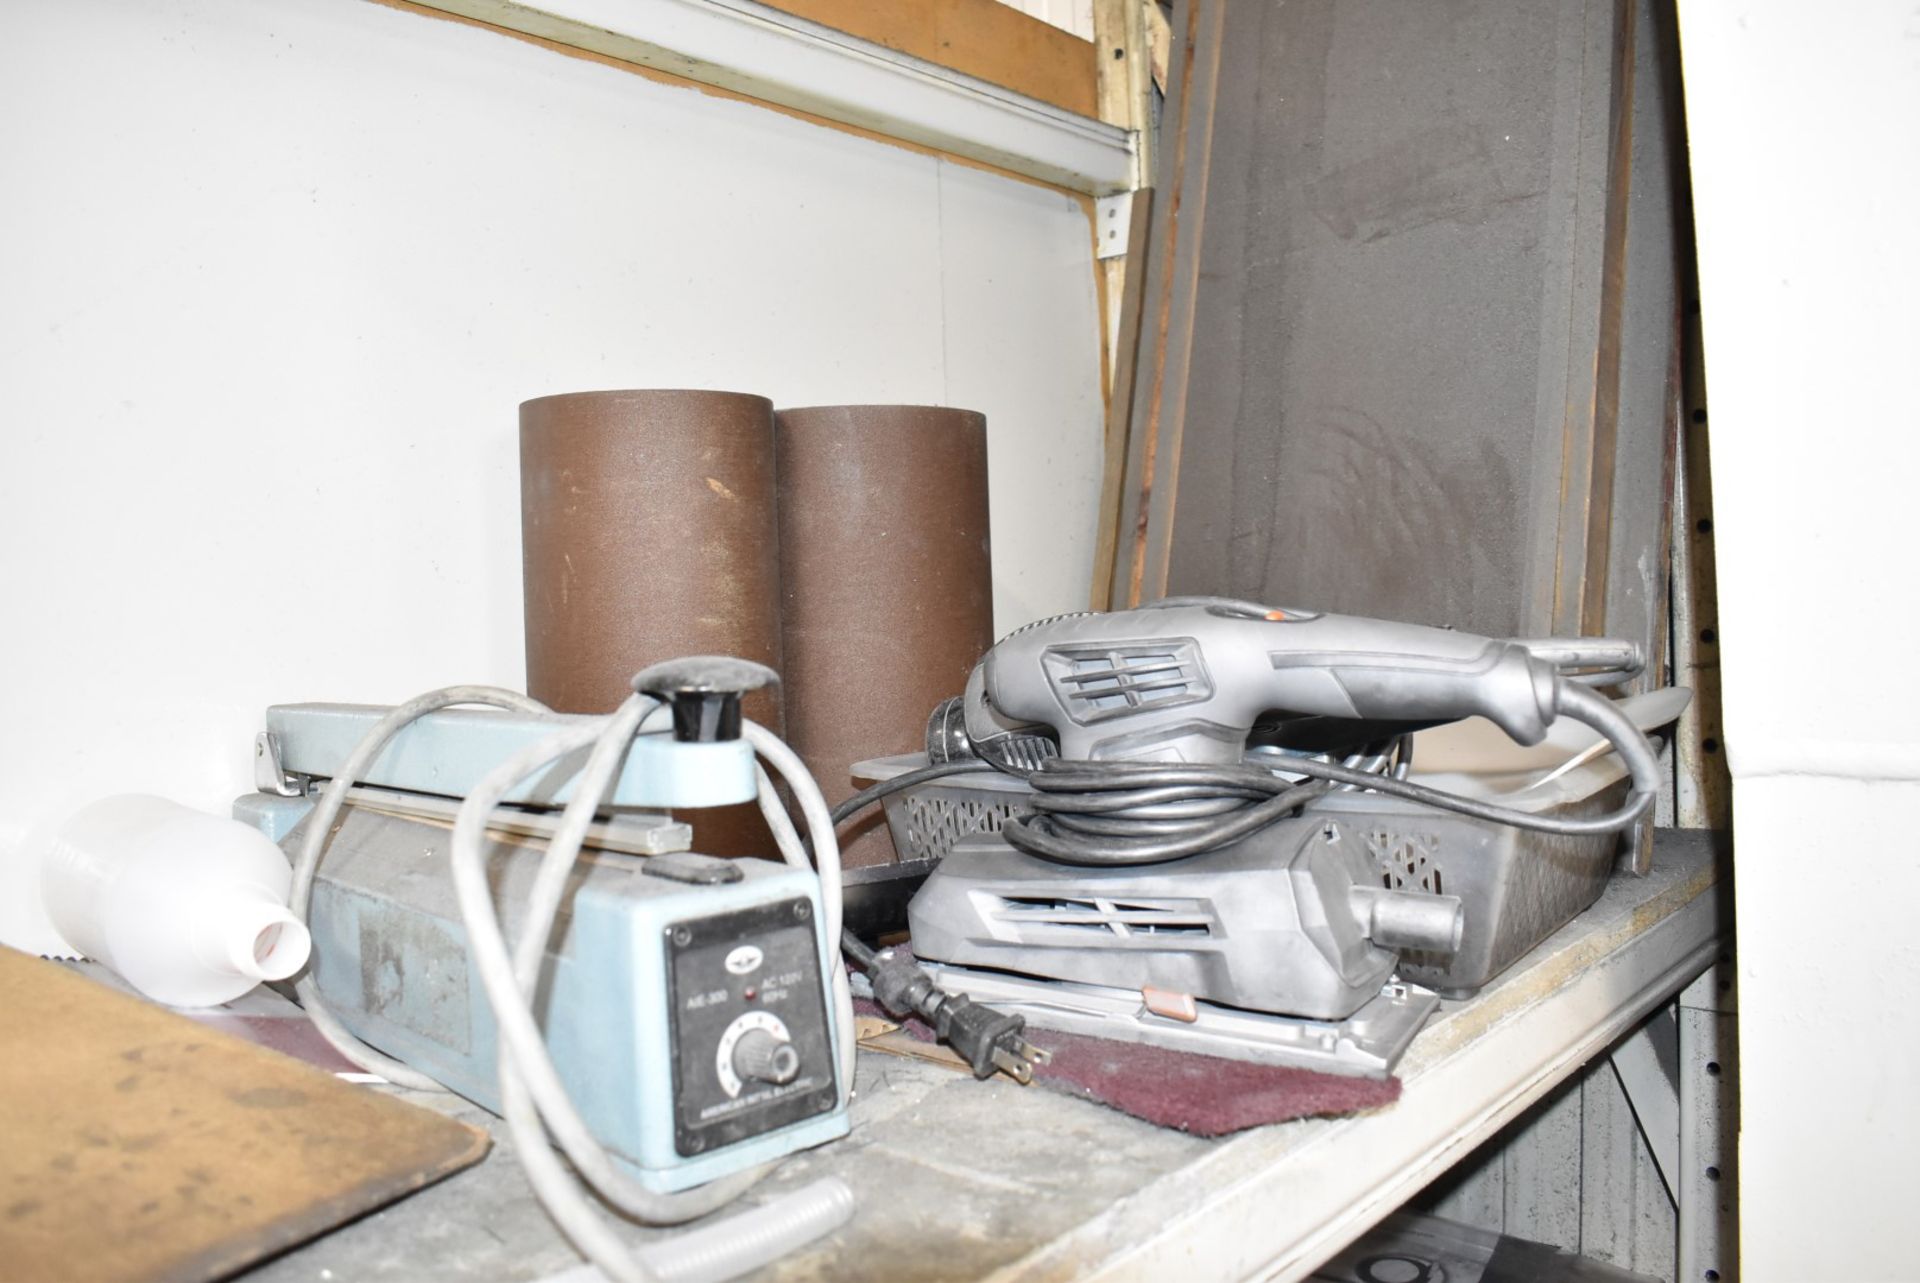 LOT/ STEEL SHELVES WITH CONTENTS CONSISTING OF GRINDERS, DEBURRING, POLISHING & CLEANING SUPPLIES - Image 2 of 6